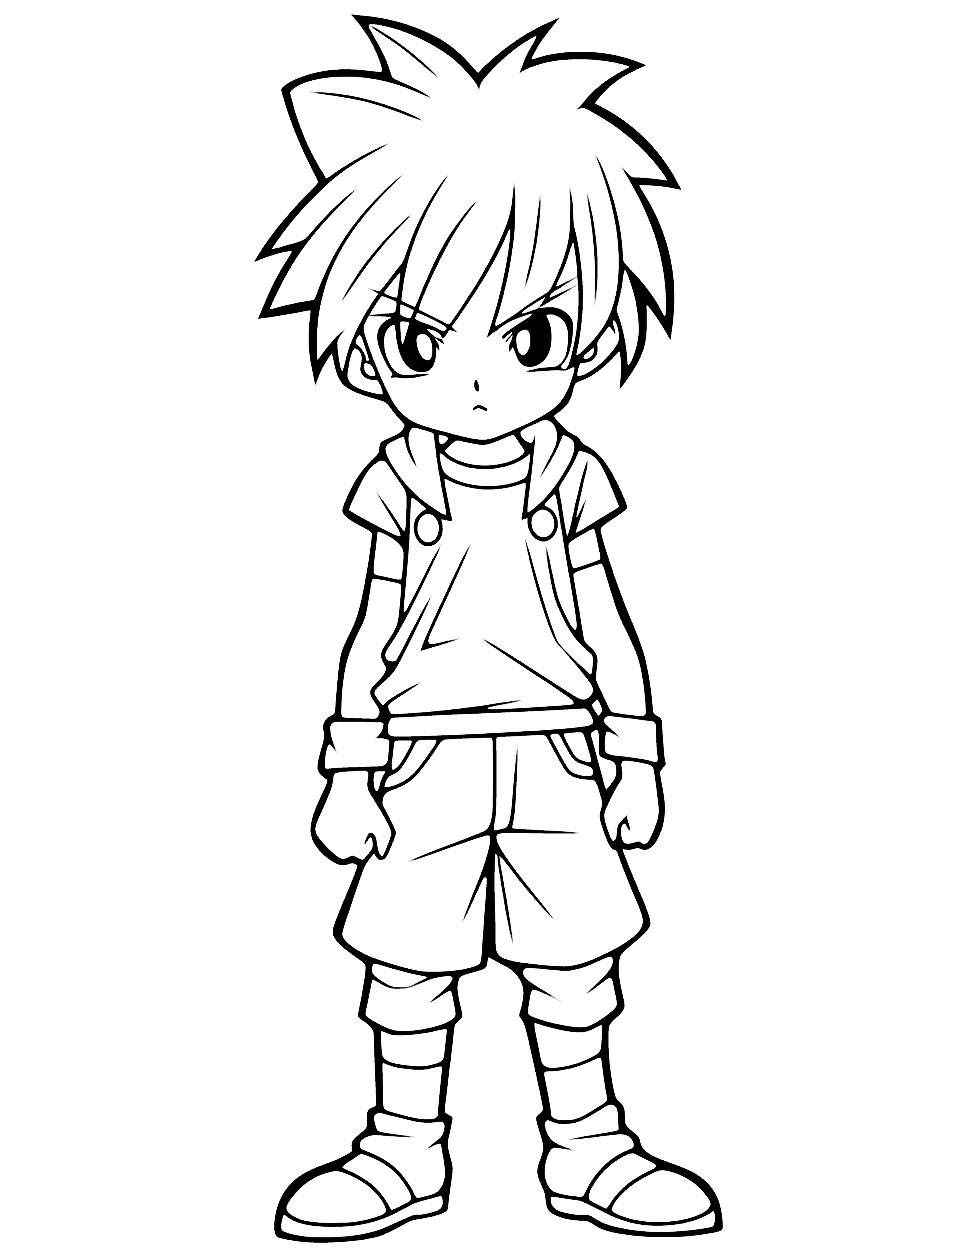 Sad Anime Boy Coloring Page - A coloring page featuring a sad anime boy, expressing deep emotions.